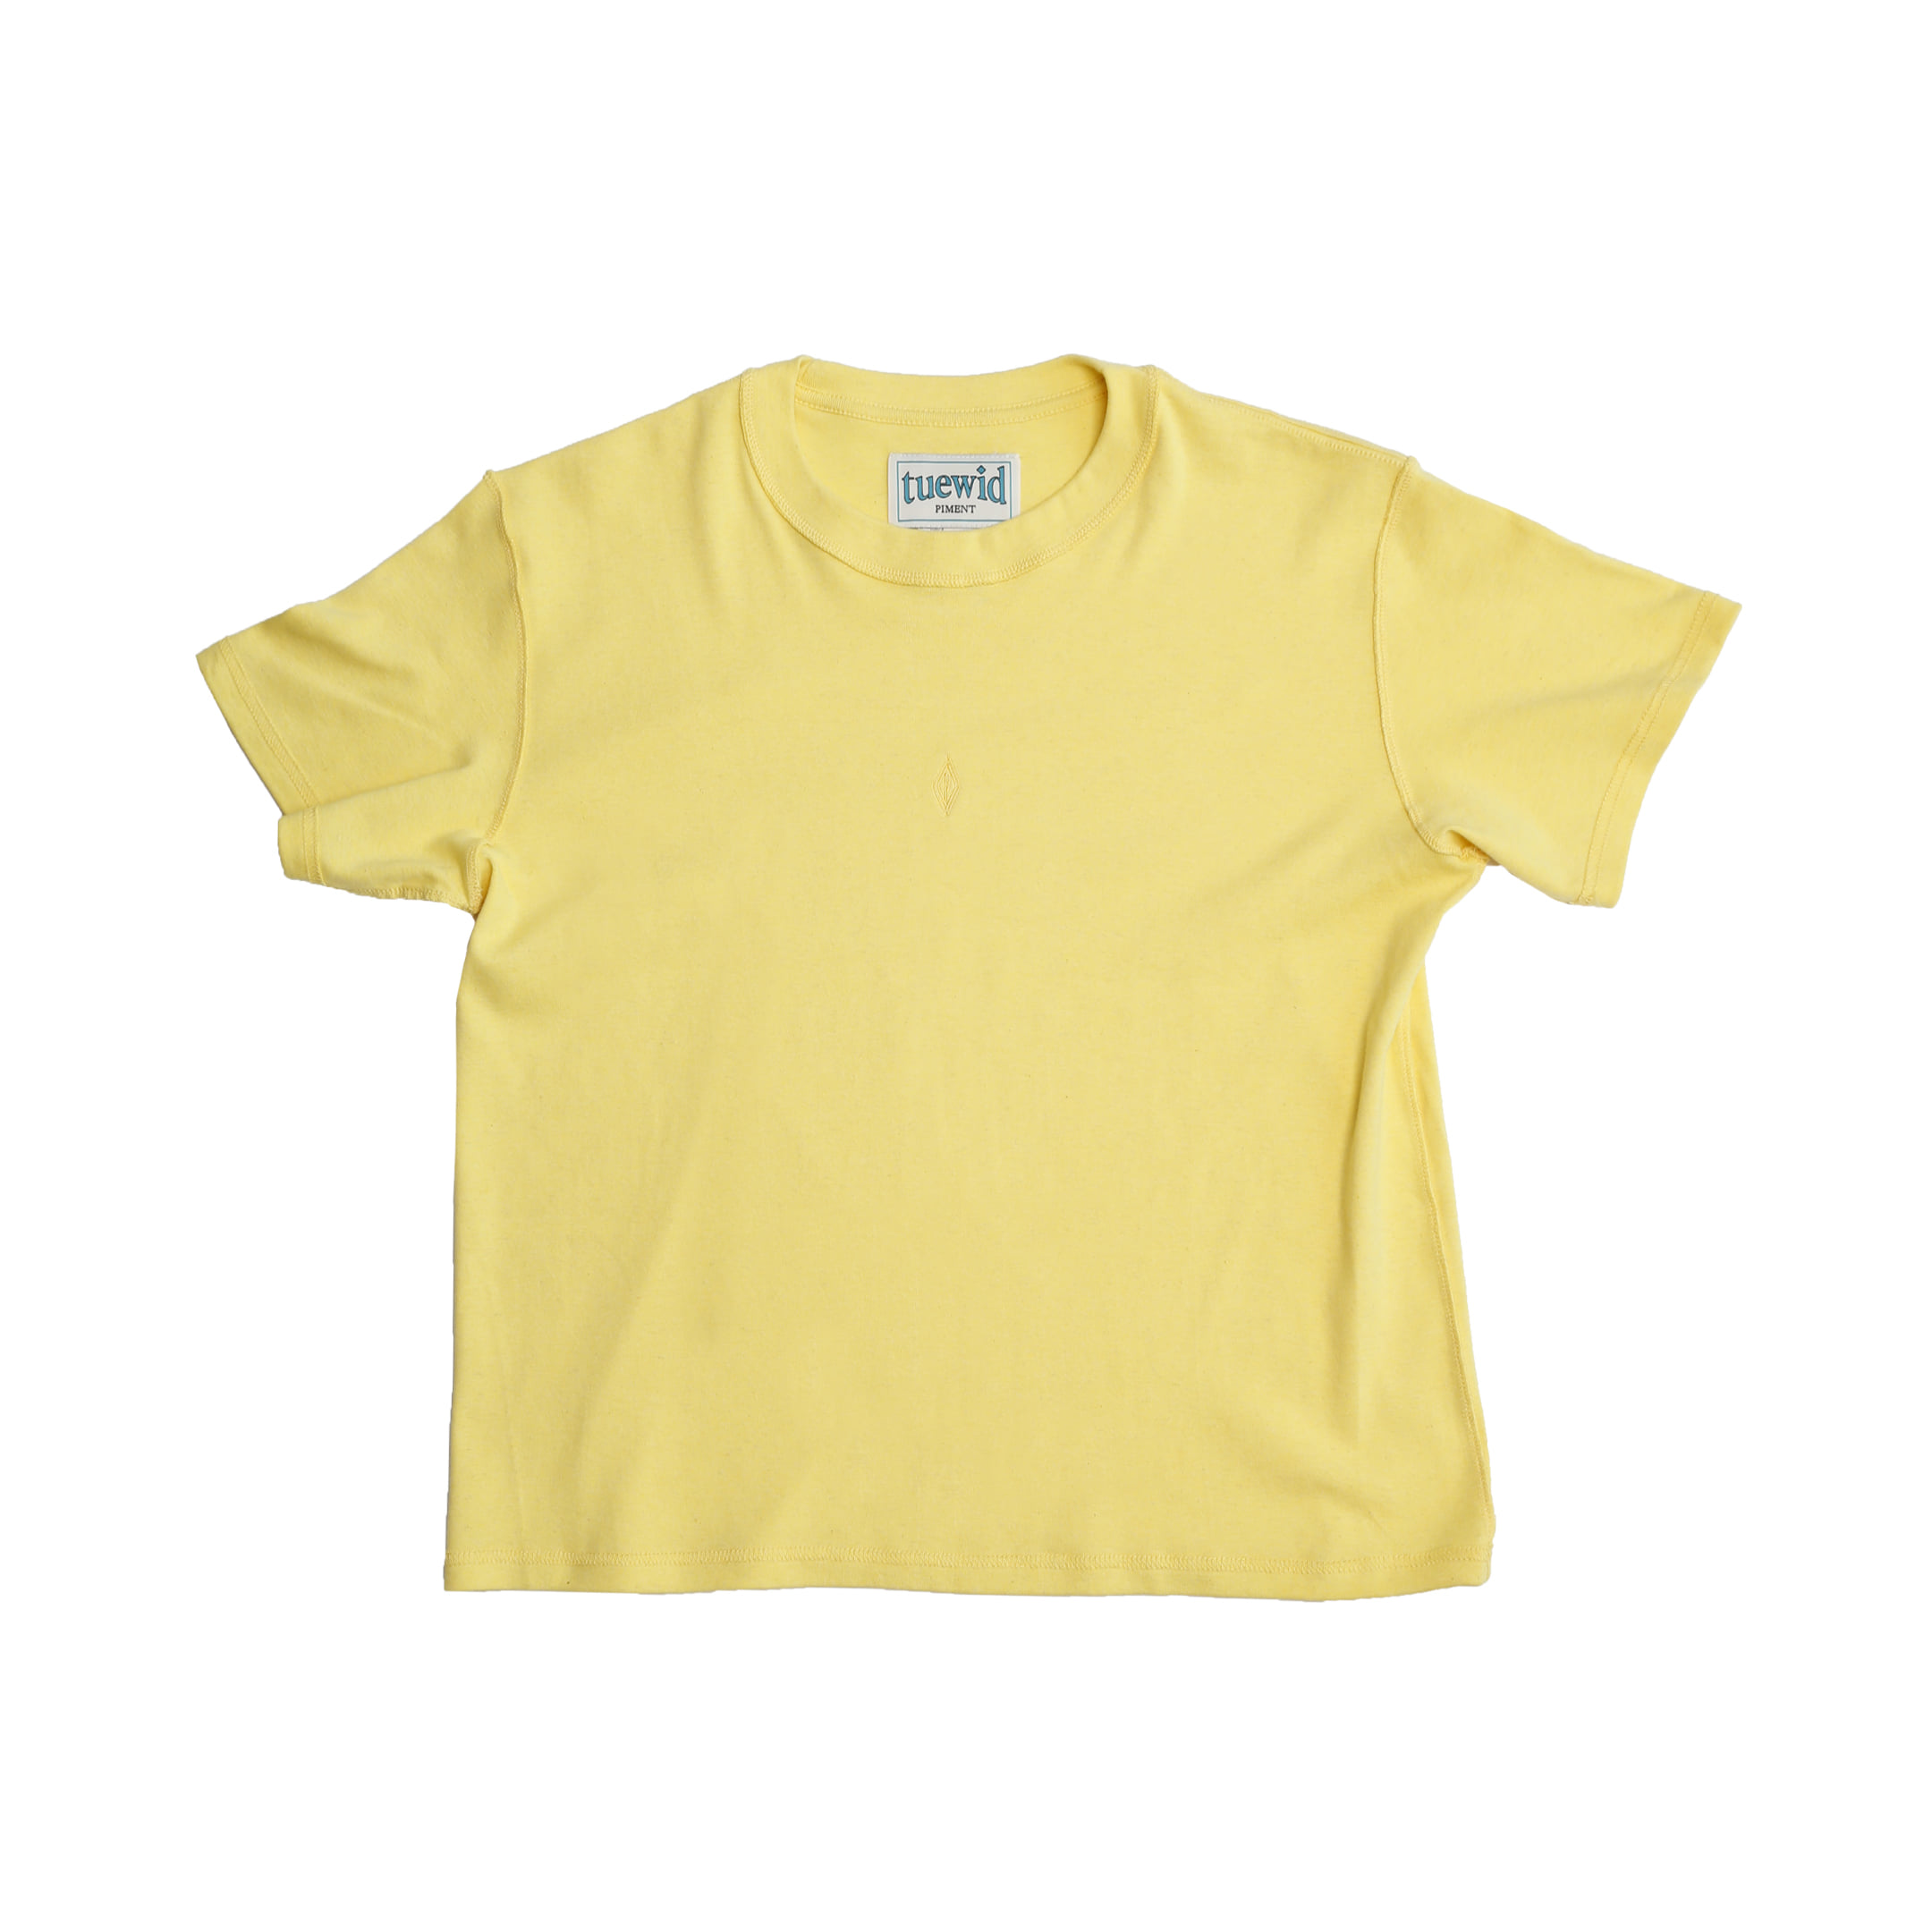 tuewid Yellow Cotton Candy Tshirts